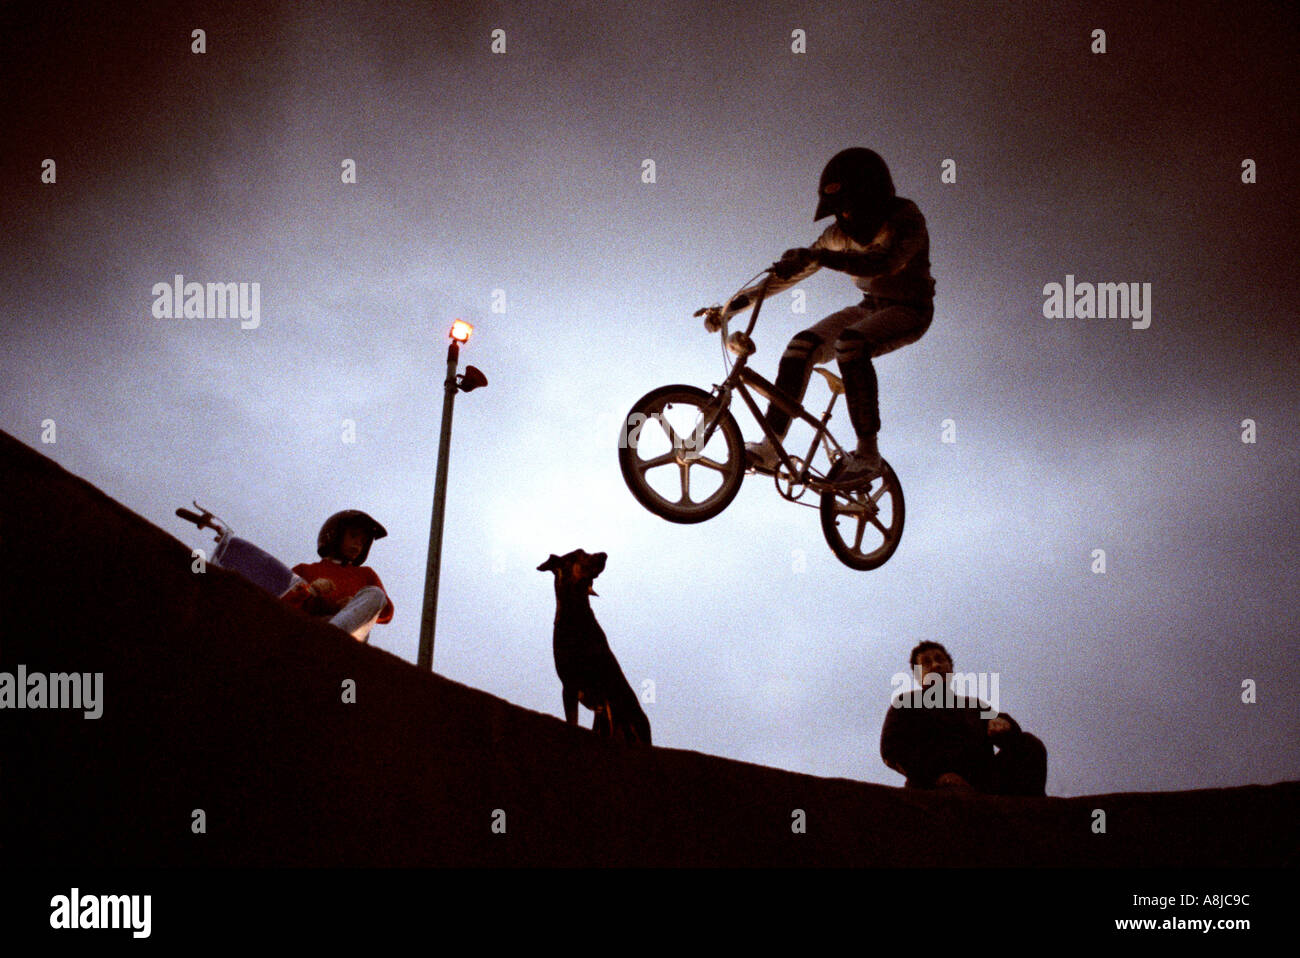 BMX biker in full safety sports wear captured in mid air at dusk with  dog and onlookers Stock Photo